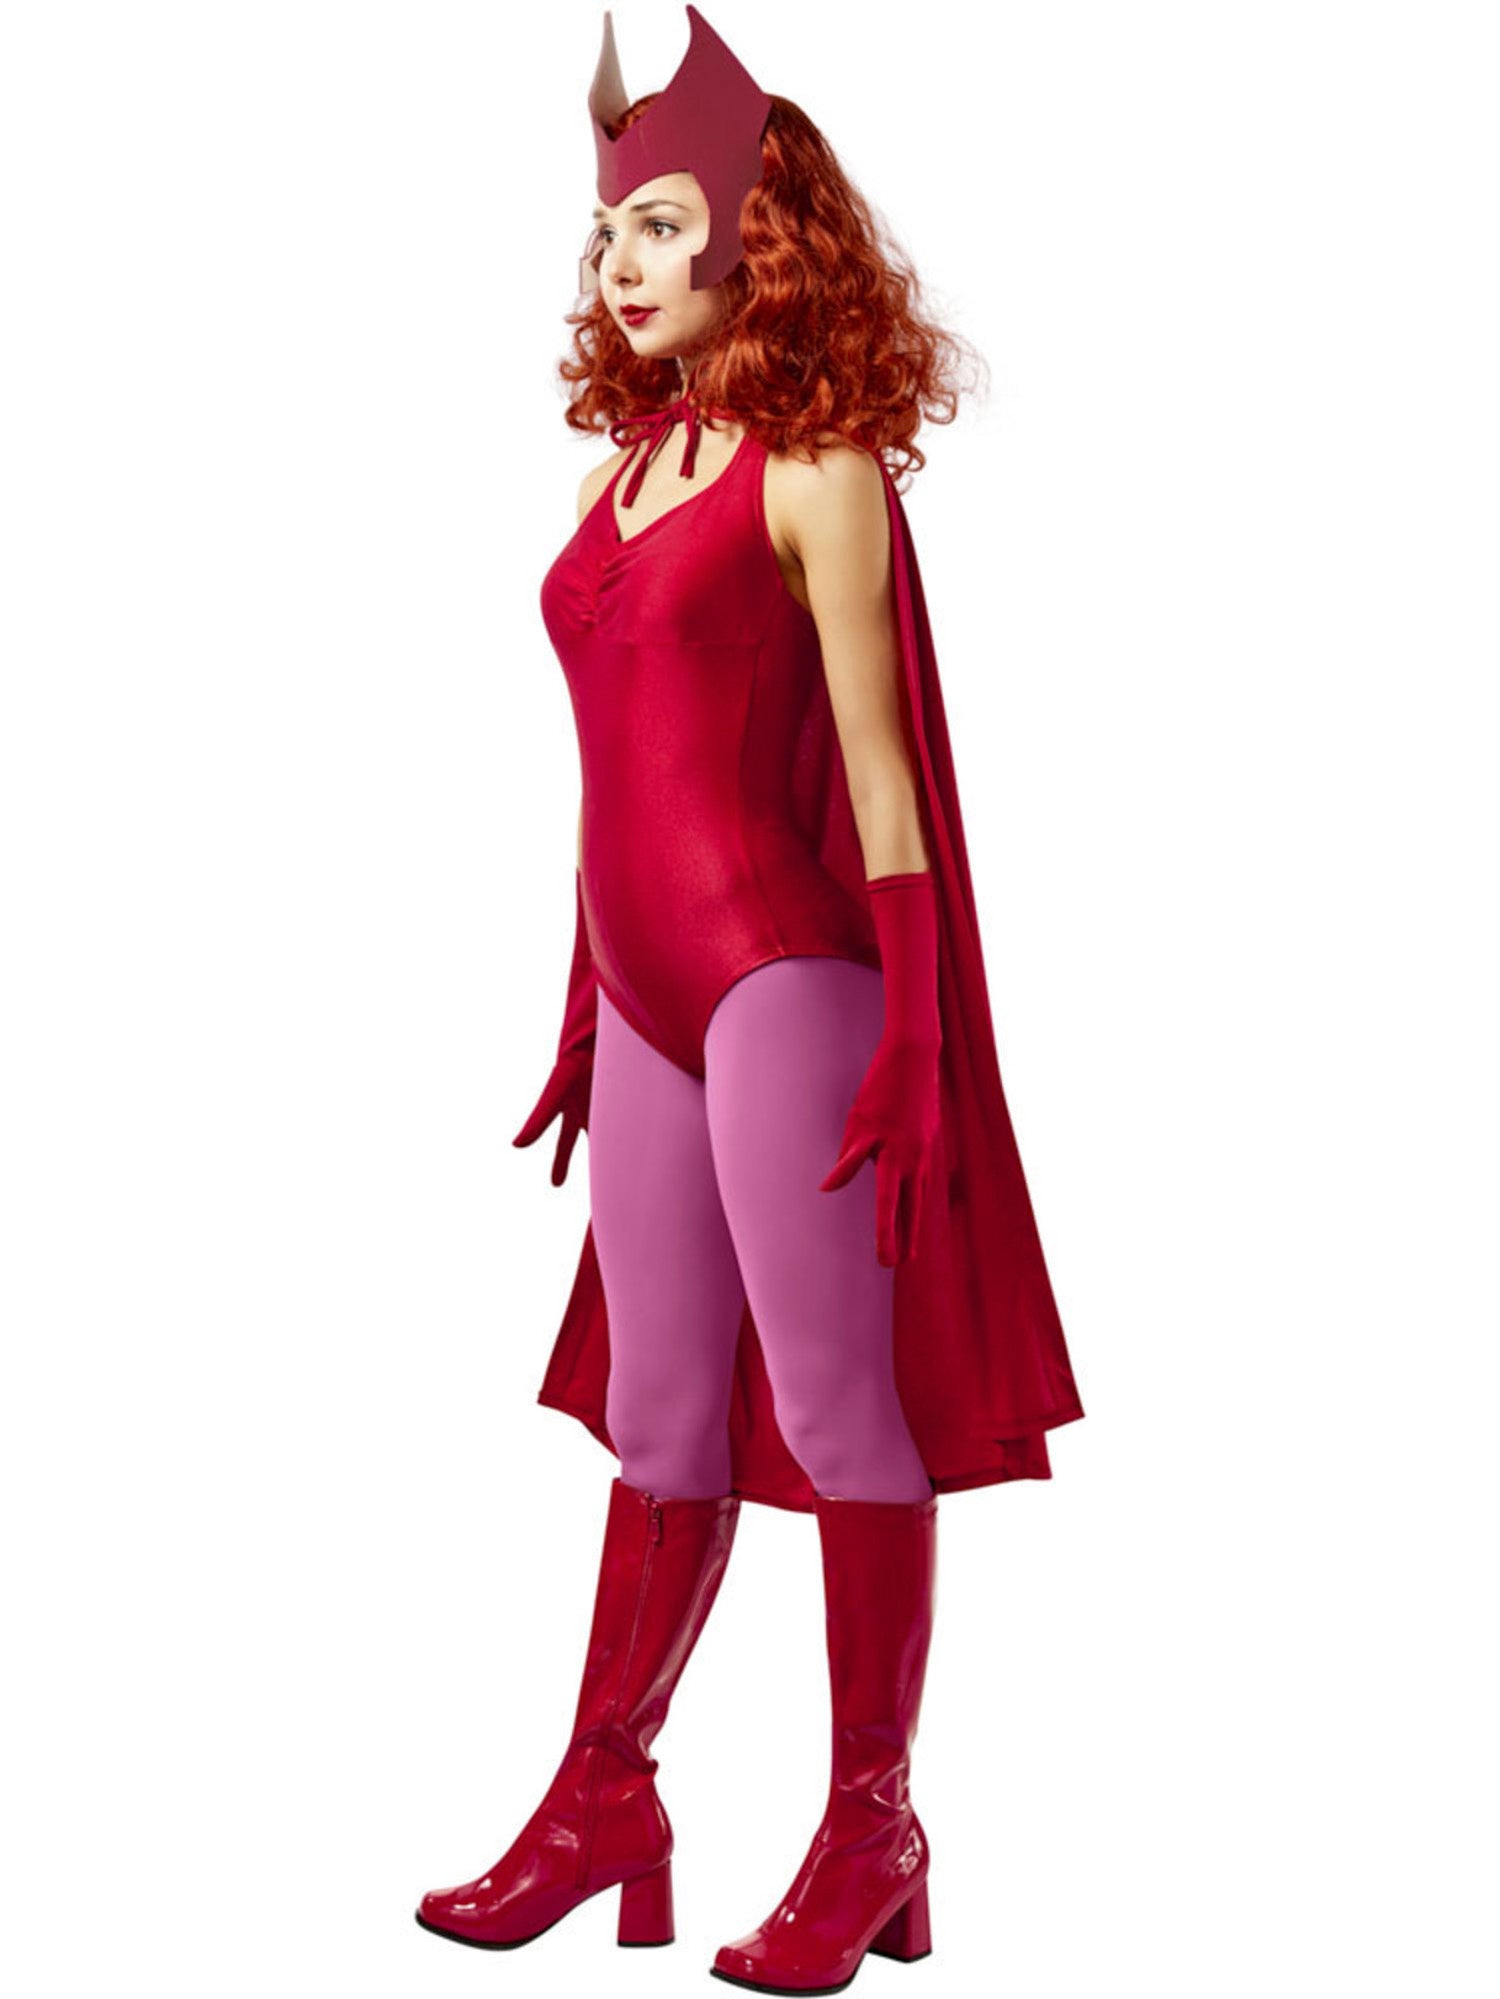 Adult Wanda Vision Scarlet Witch Costume - costumes.com